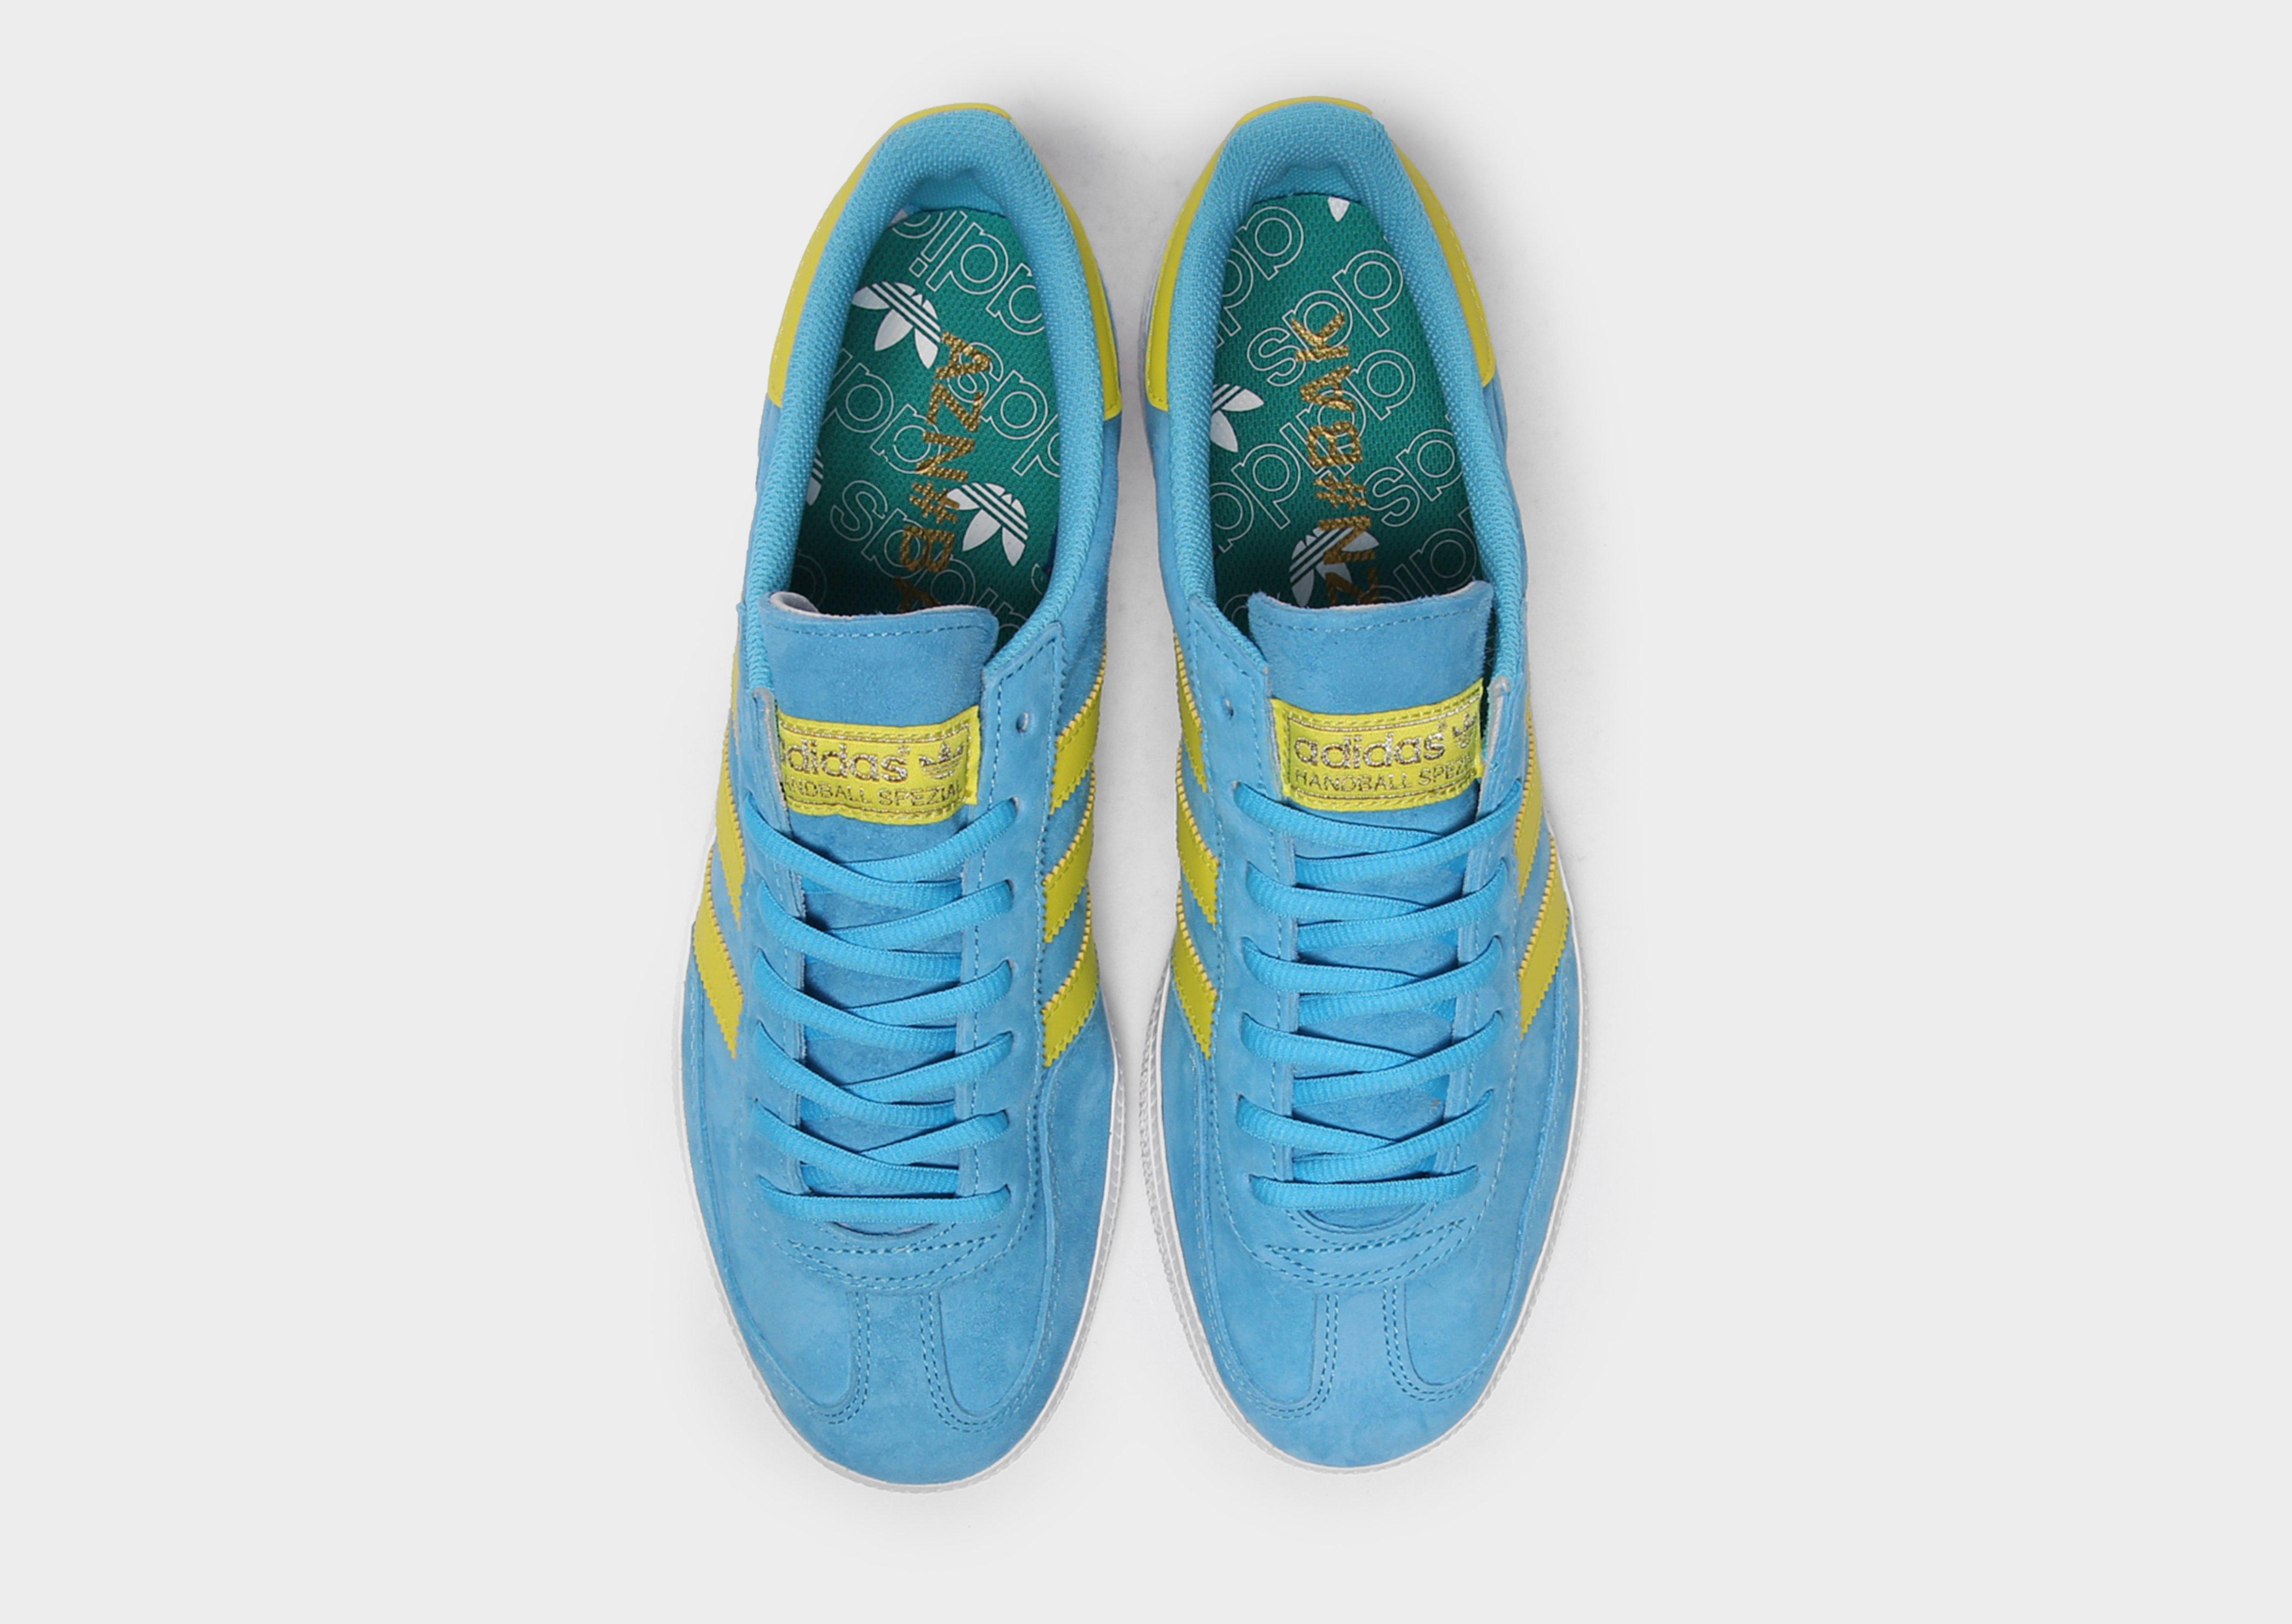 adidas spezial yellow and blue